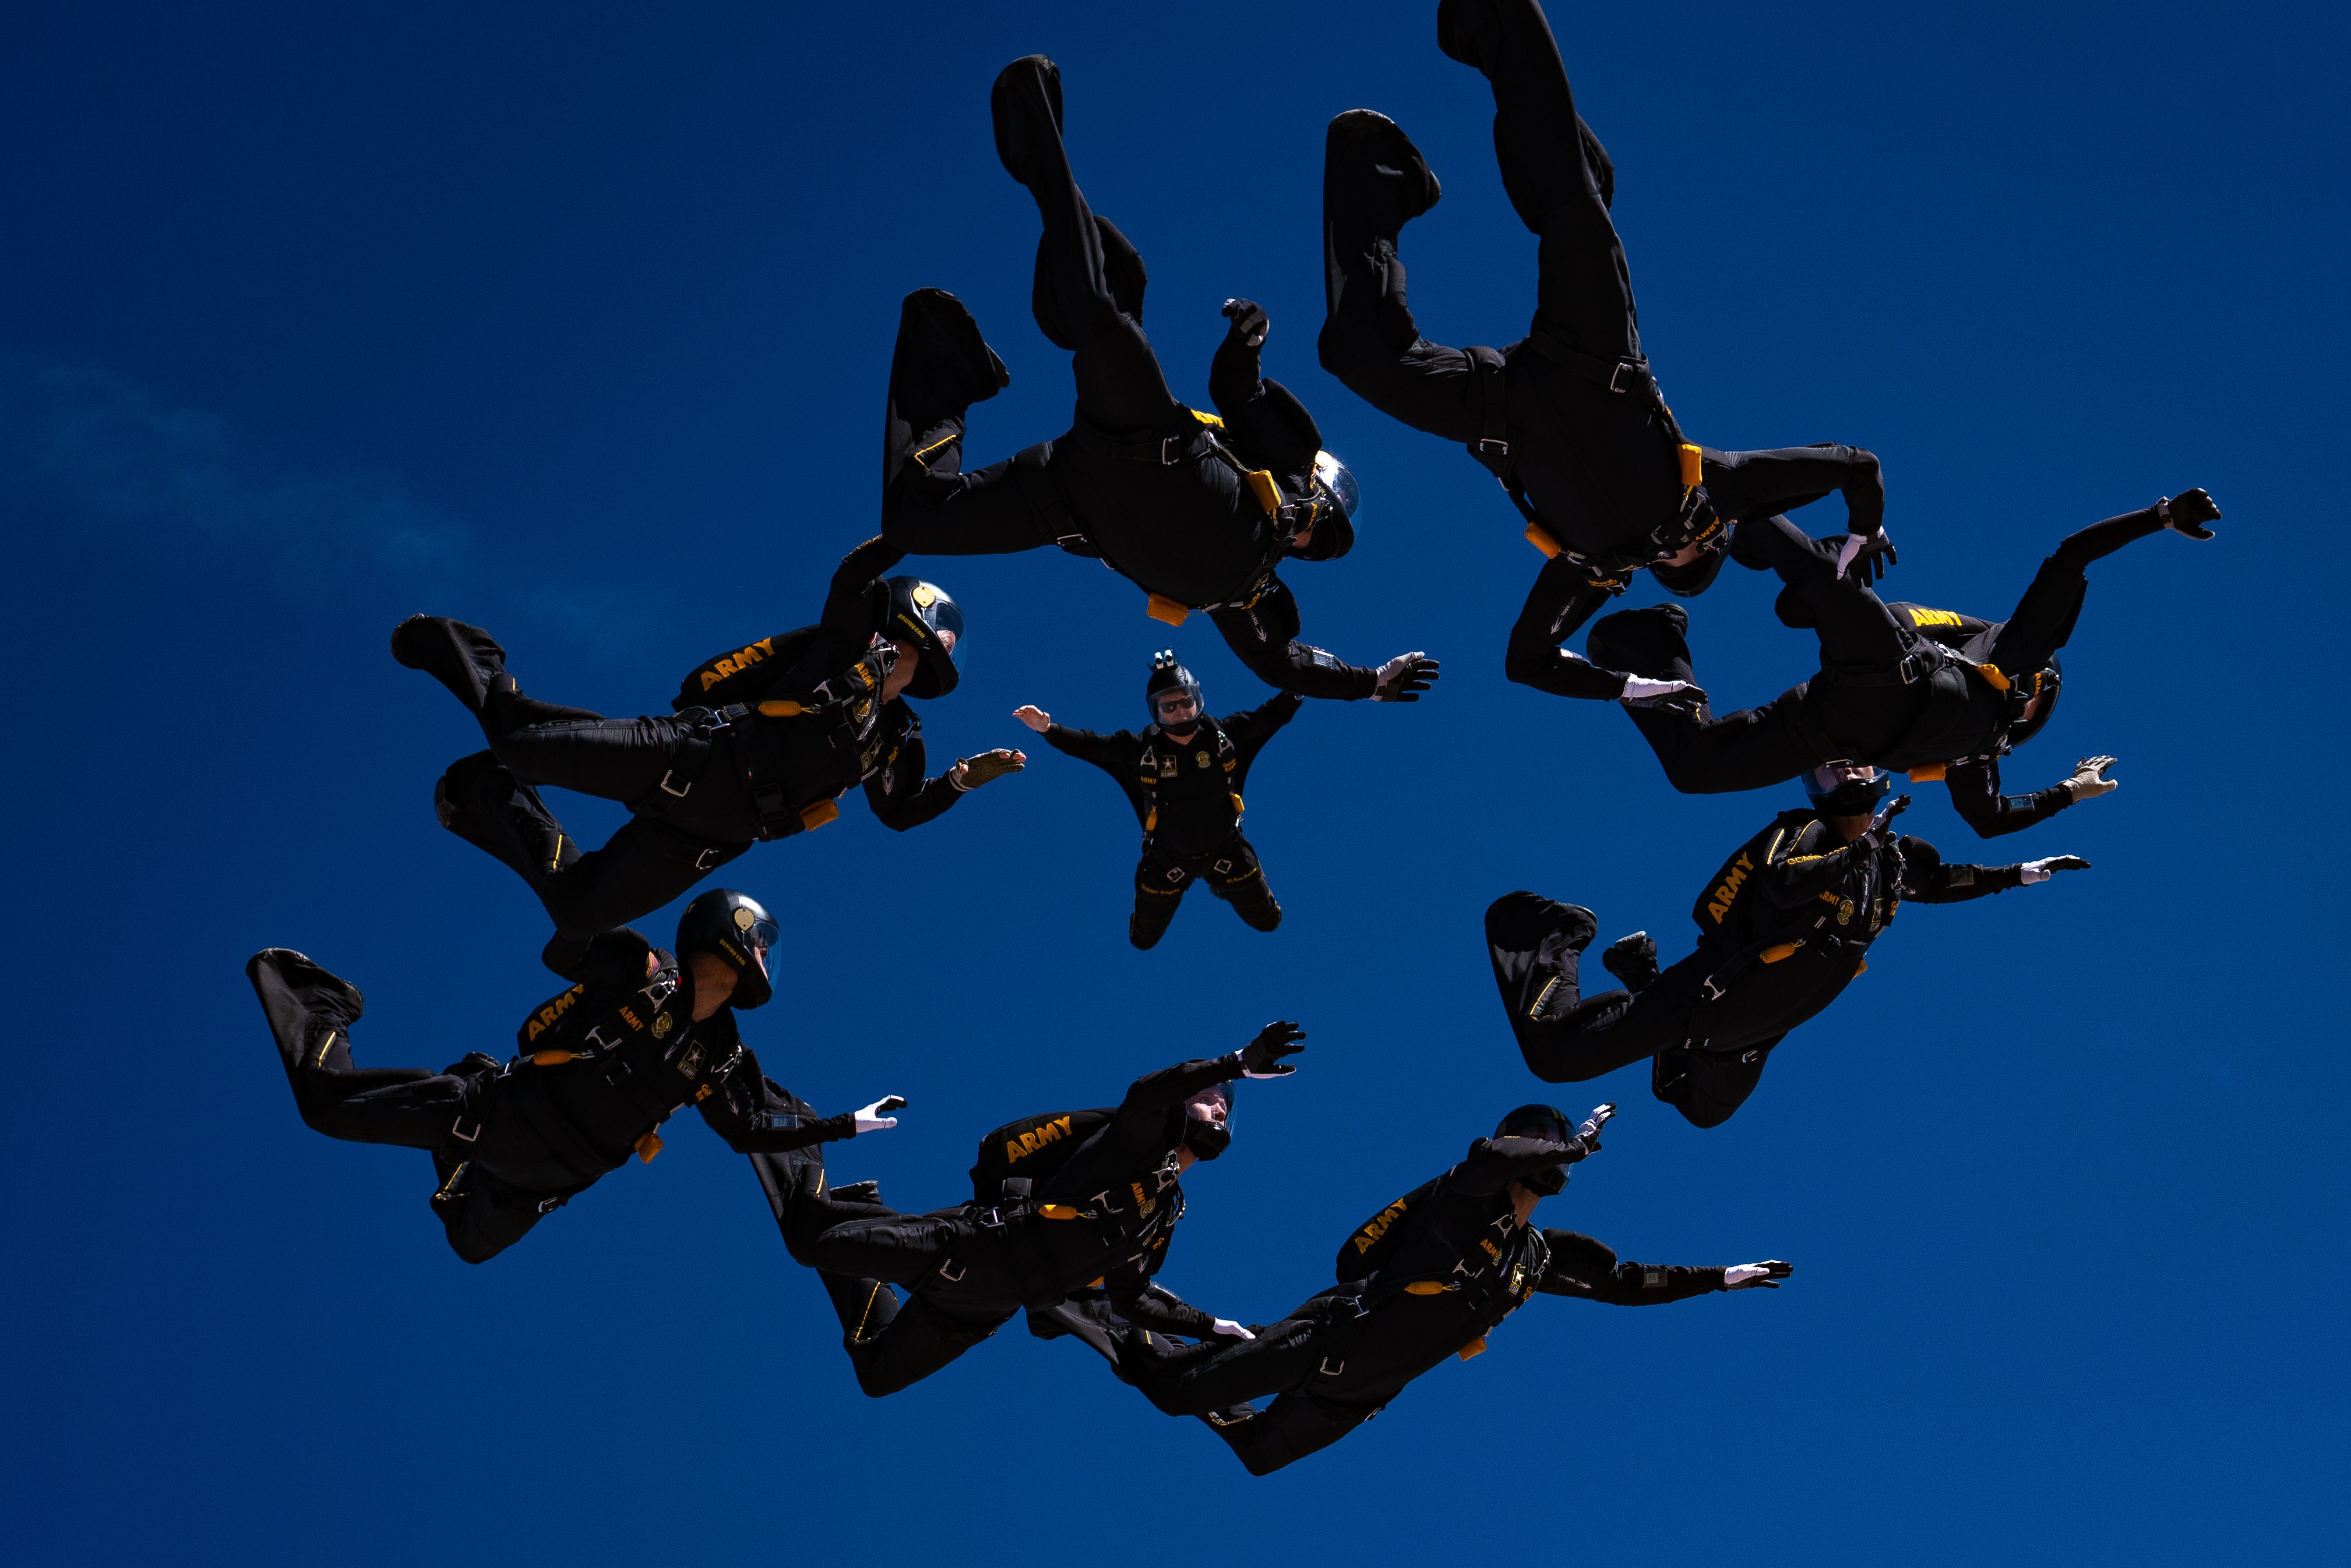 The U.S. Army Parachute Team is competing in the United States Parachute Association National Skydiving Championship events. The team completes an 8-way Formation Skydiving jump. USAPT is competing from 25 Oct. through 30 Oct. 2021 in Eloy, Ariz. (Photo by Christopher Bess)